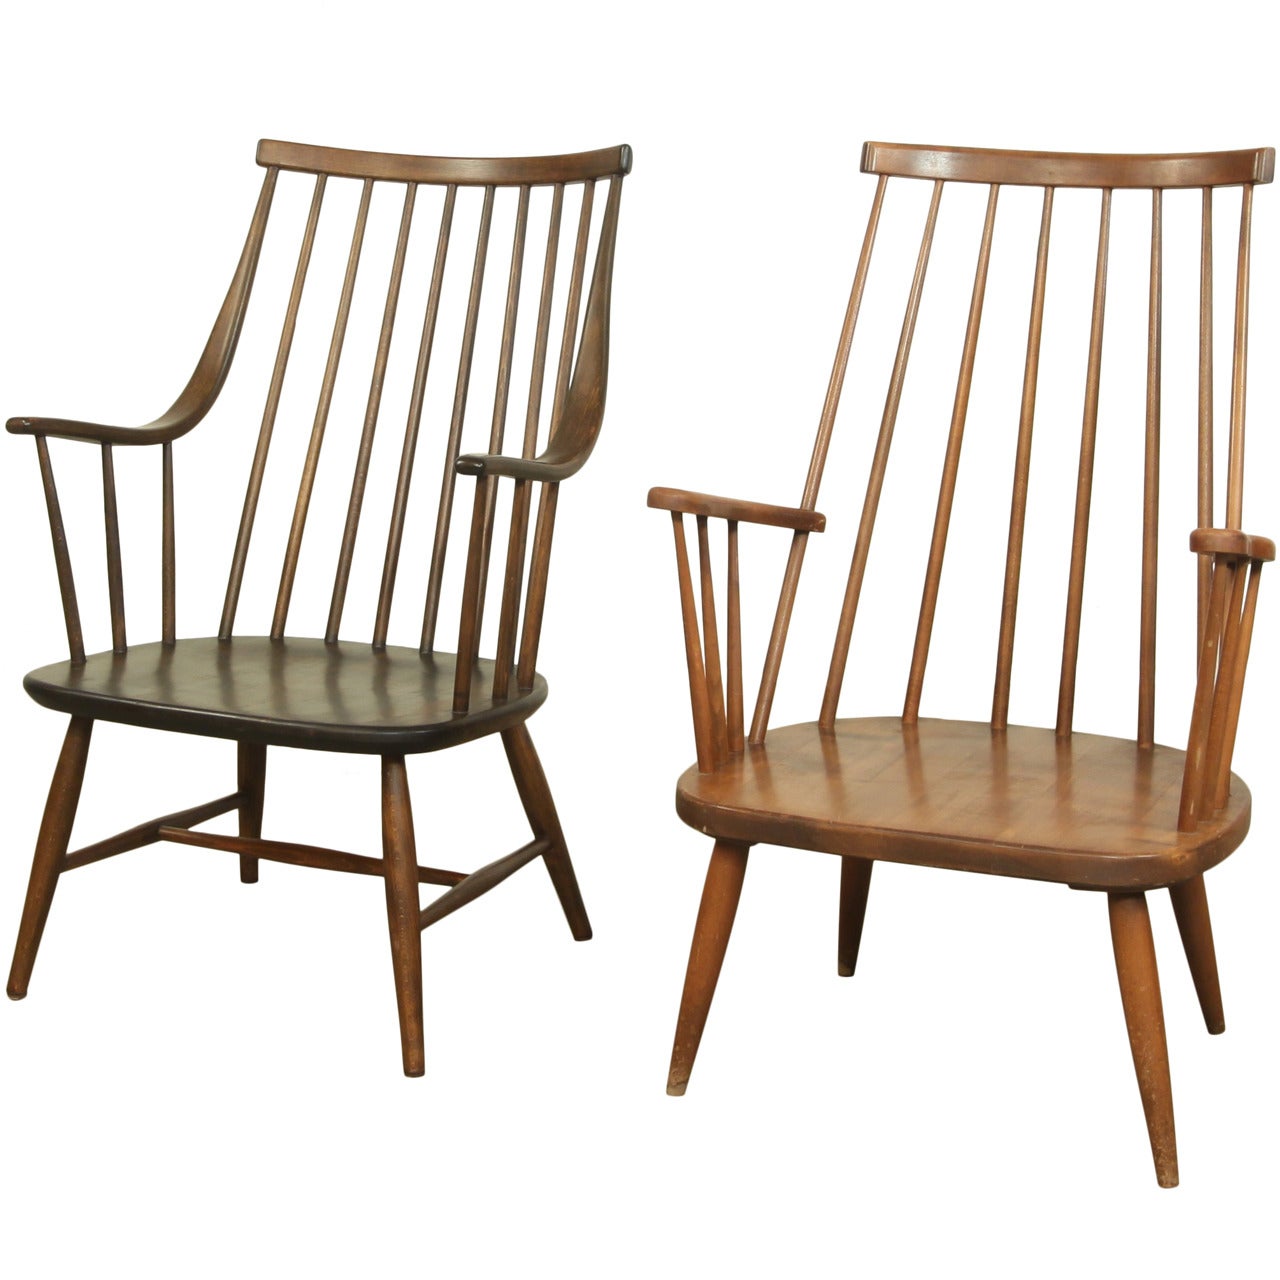 Fifties Almost Matching Set of Pastoe Windsor Relax Chairs